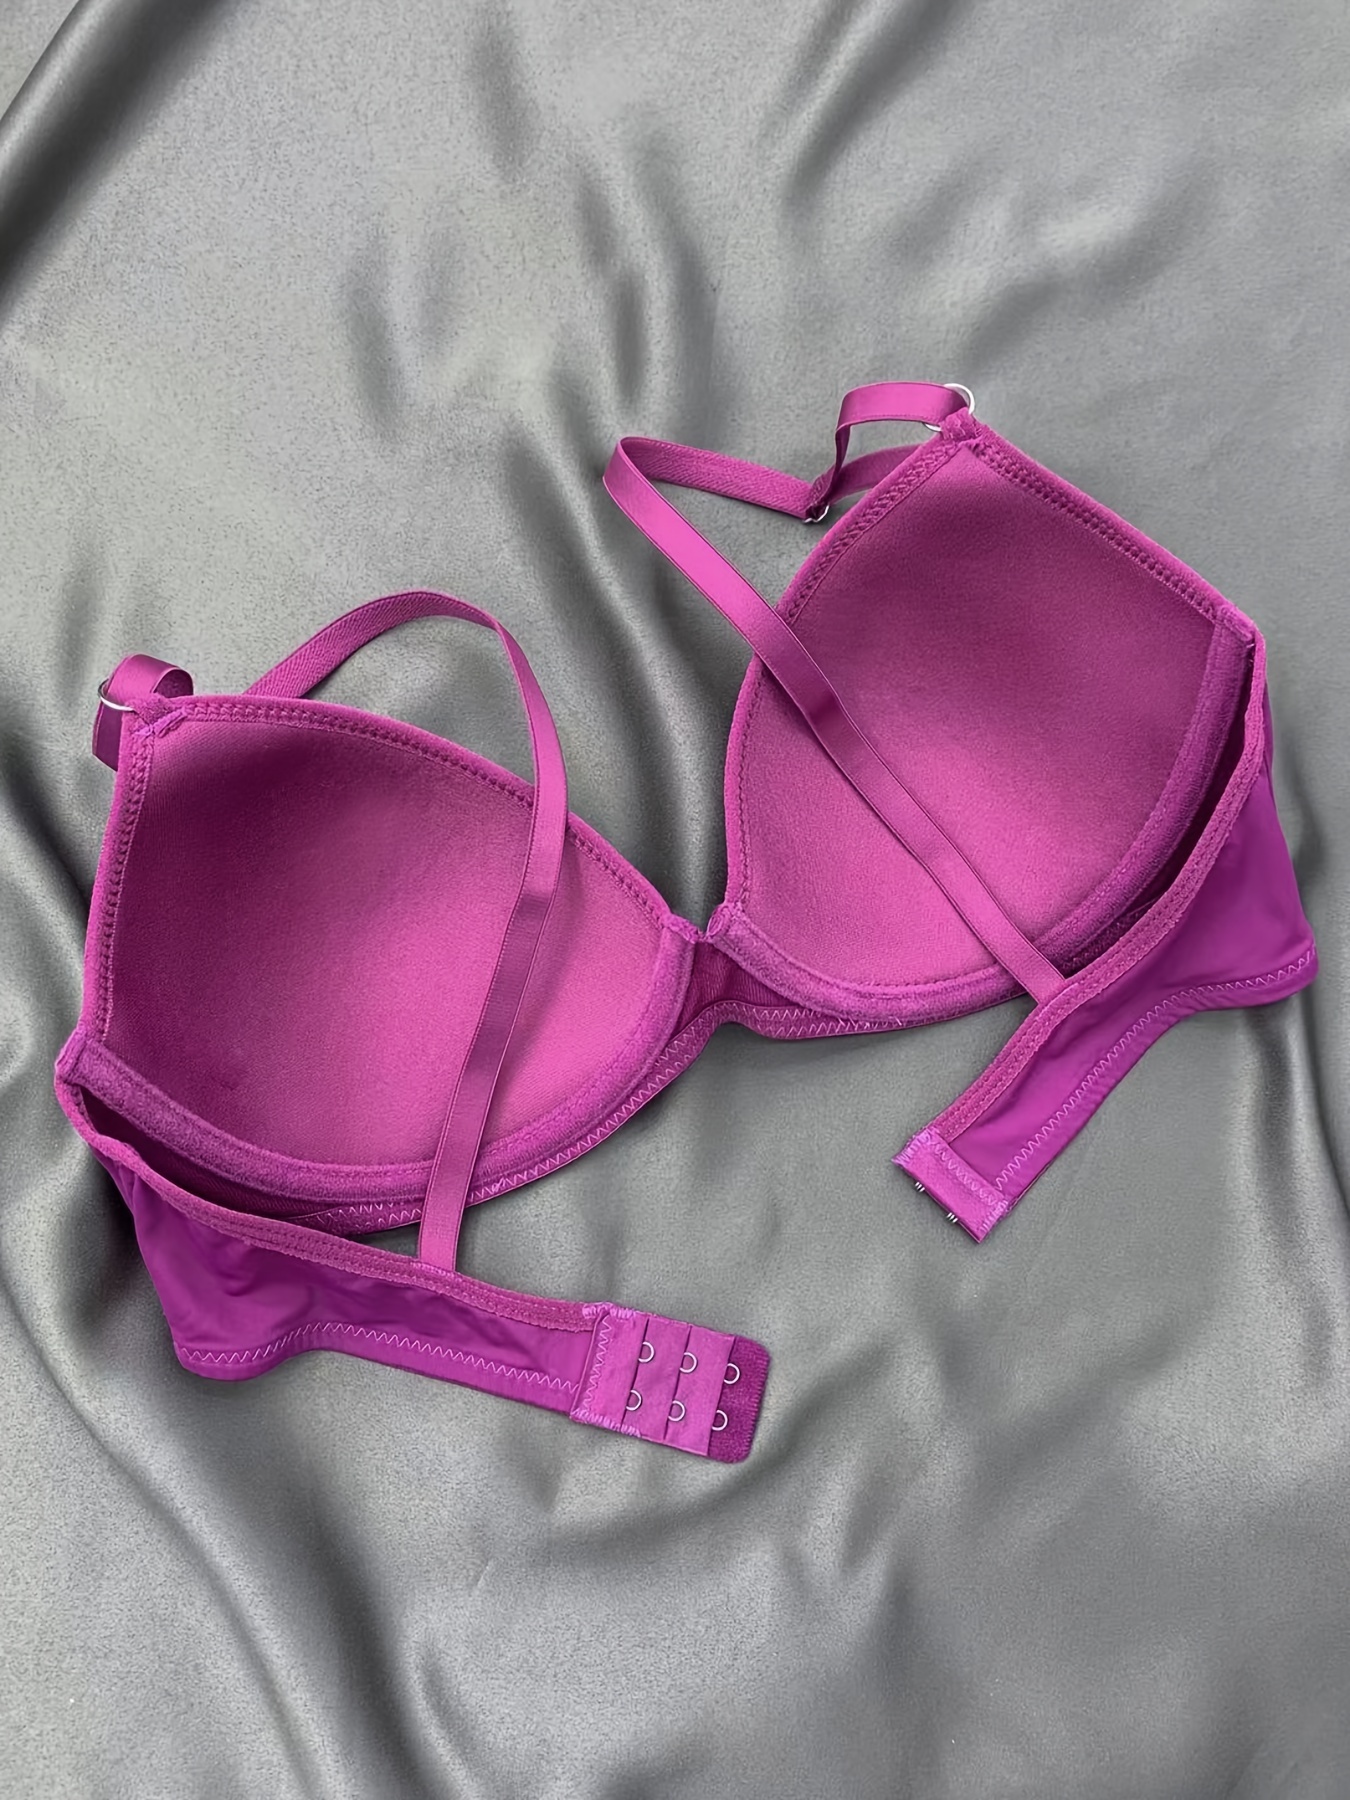 New Pink Solid Women Sexy Push Up Bra Padded Simple Straps